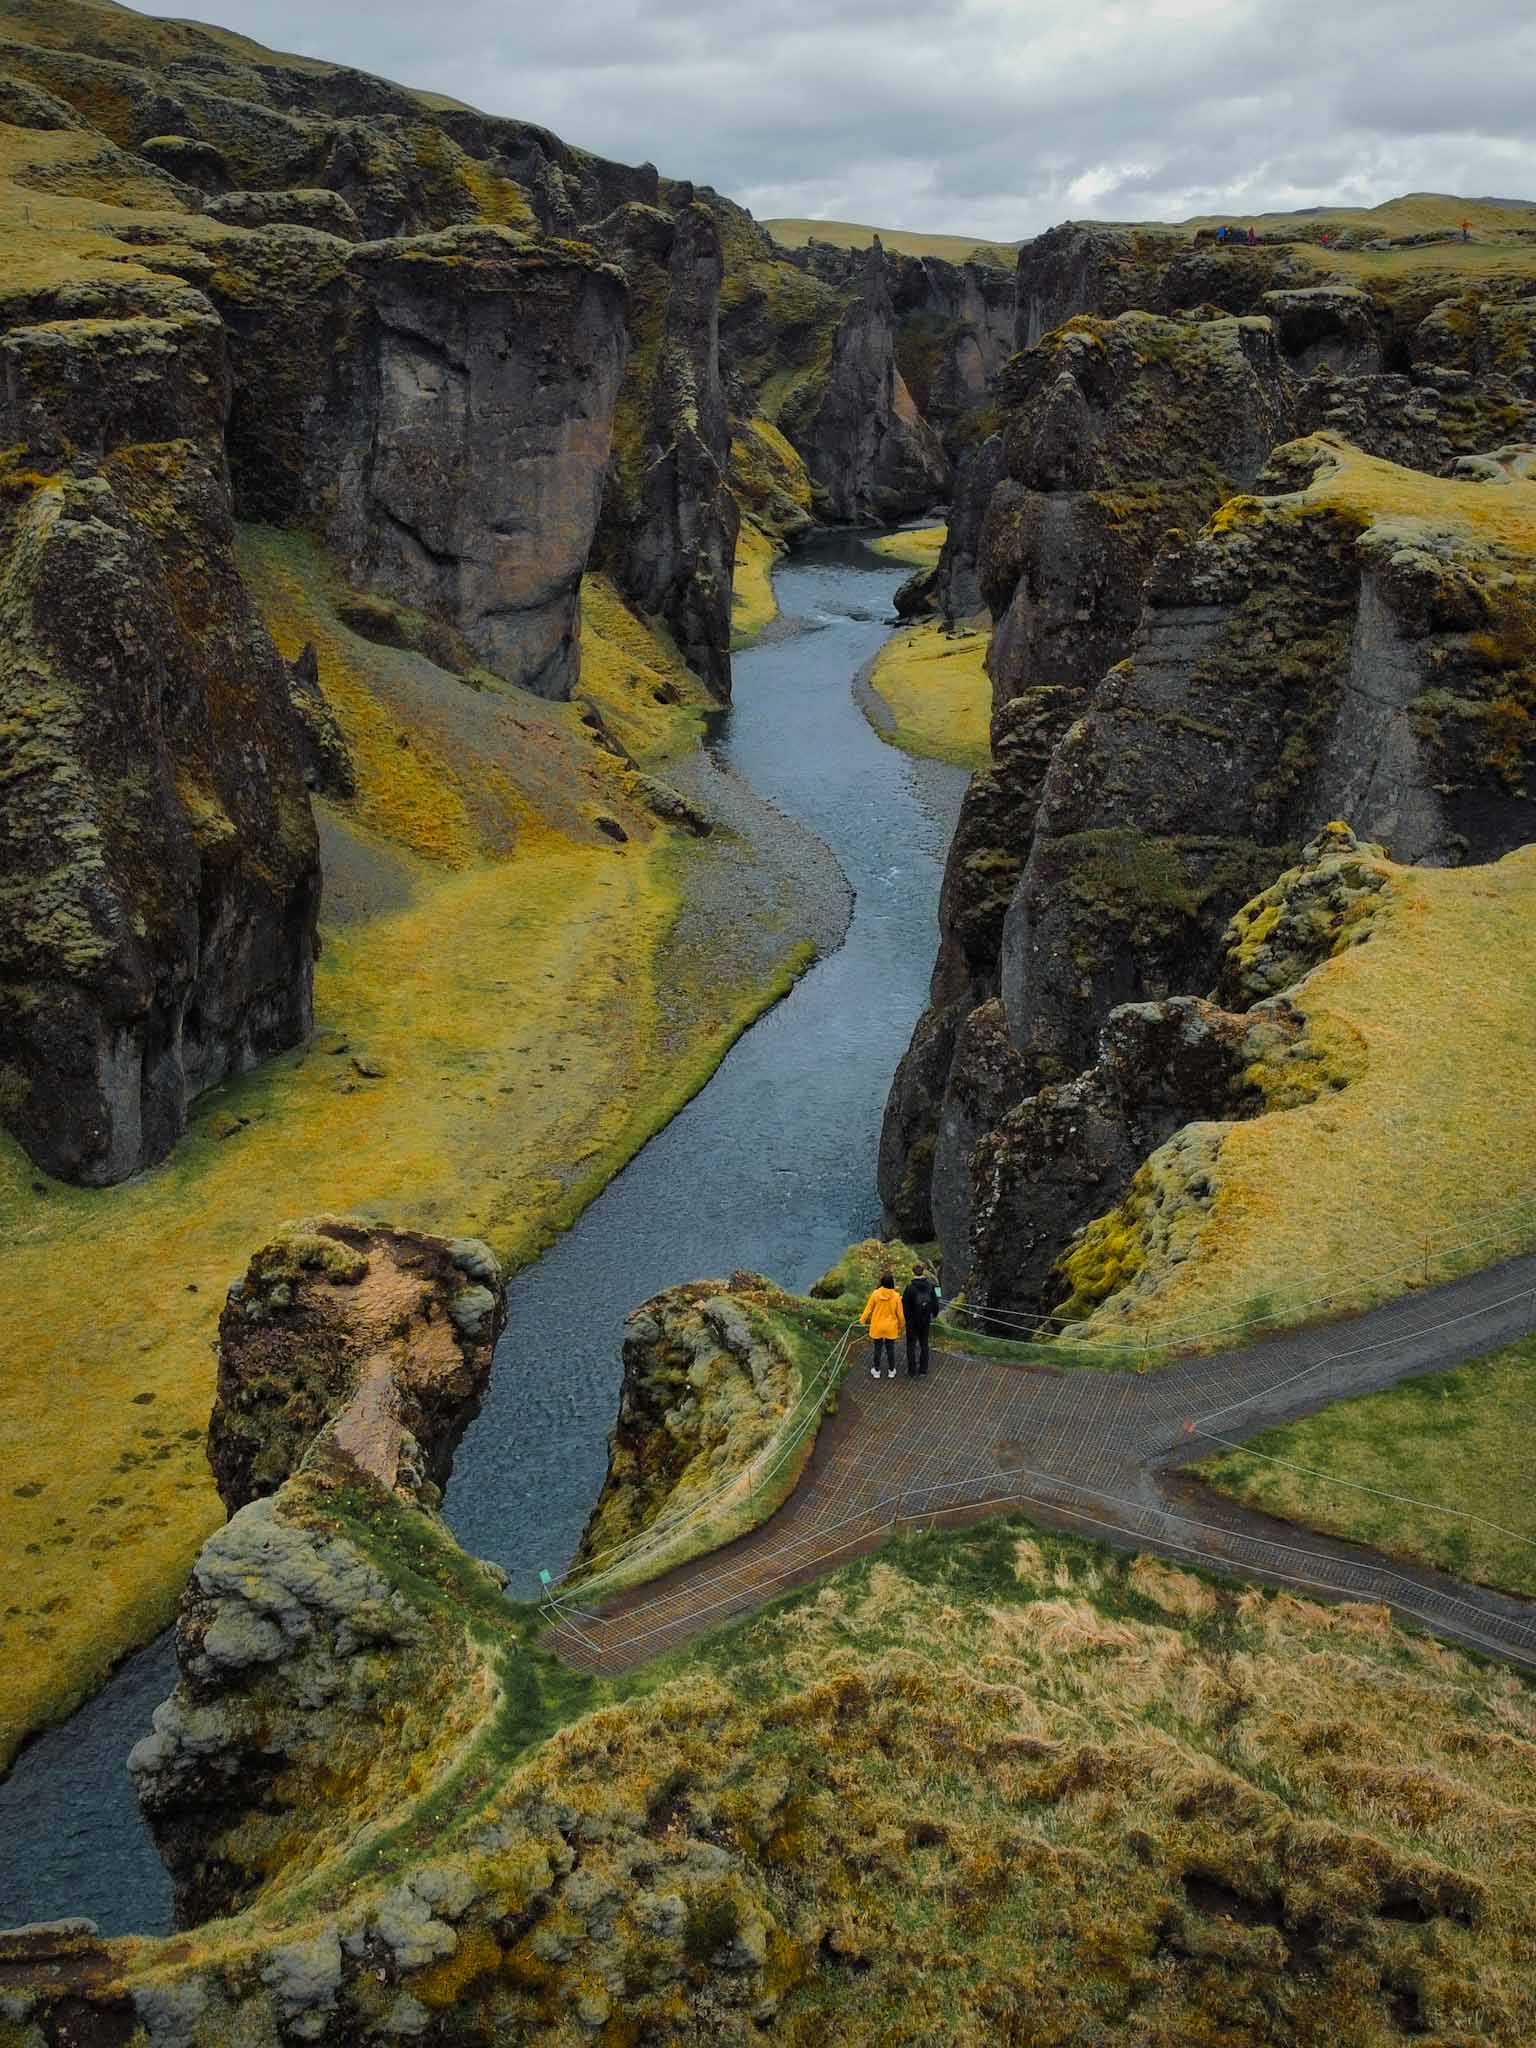 Fjadrargljufur - the famous river canyon in Iceland